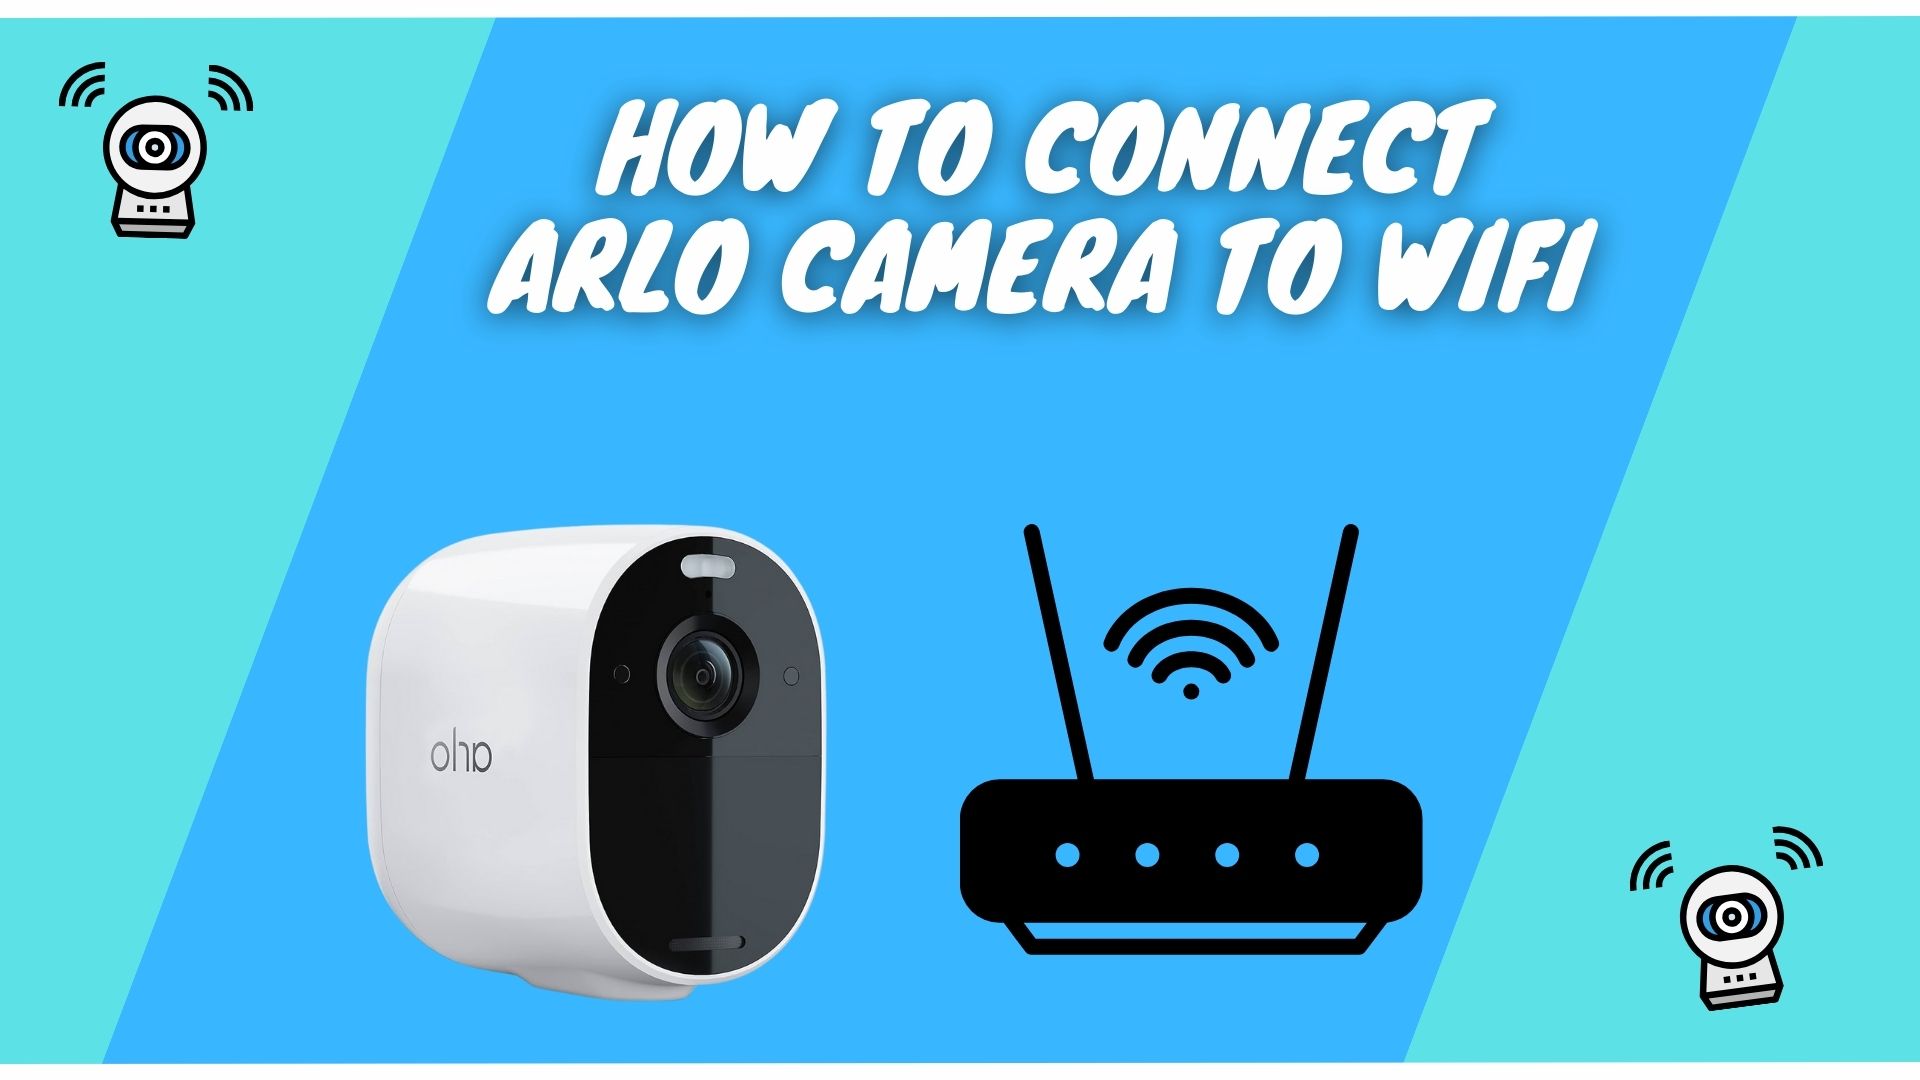 How to Connect Arlo Camera to WiFi